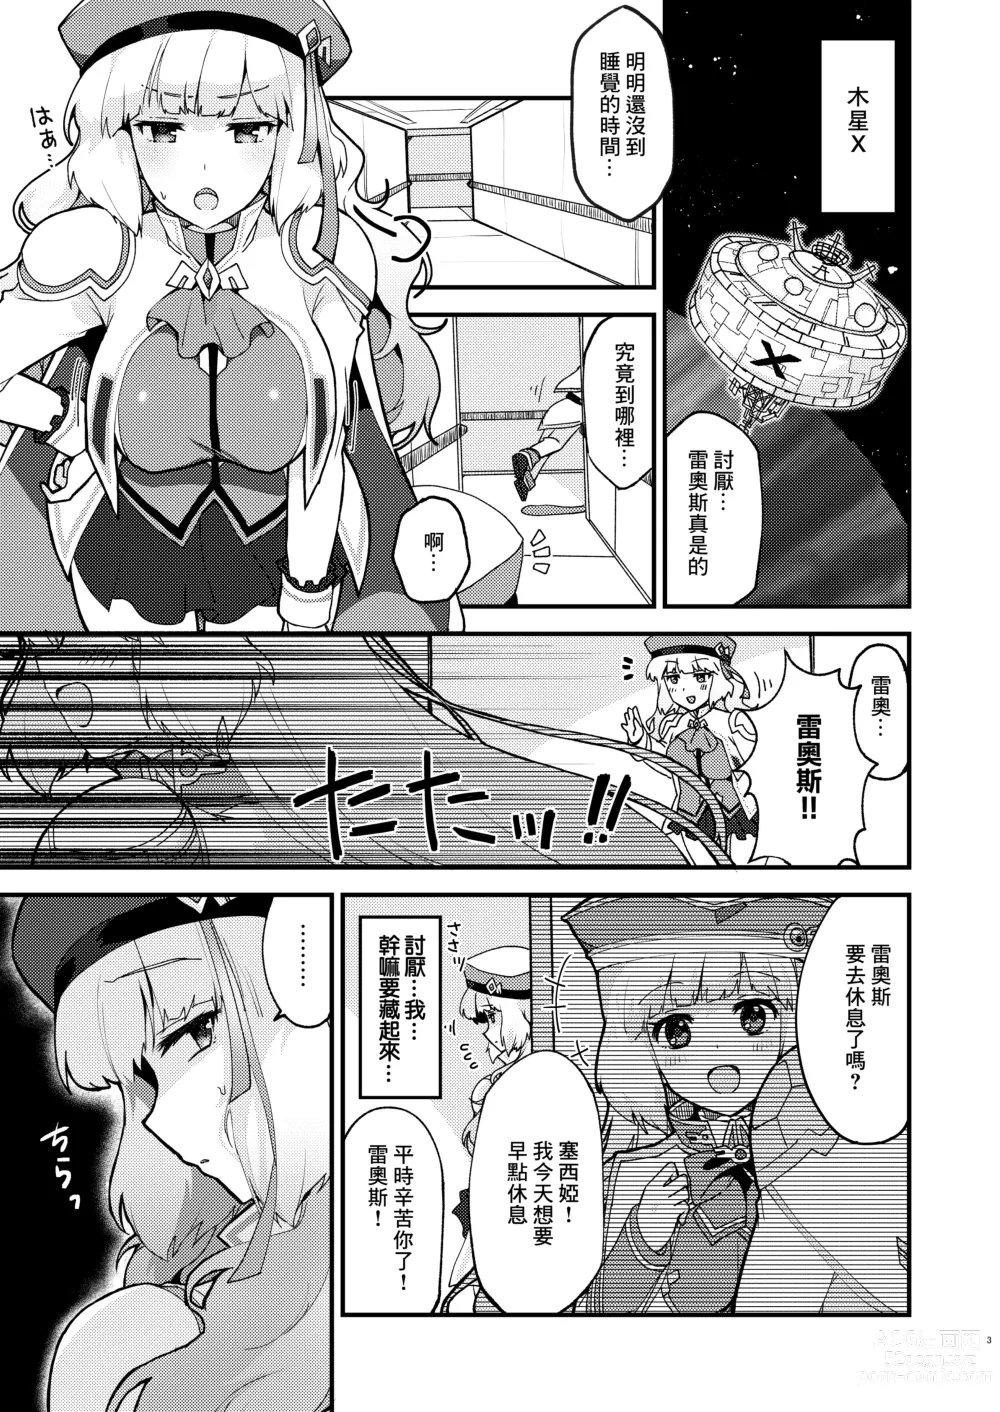 Page 3 of doujinshi 諾諾強襲